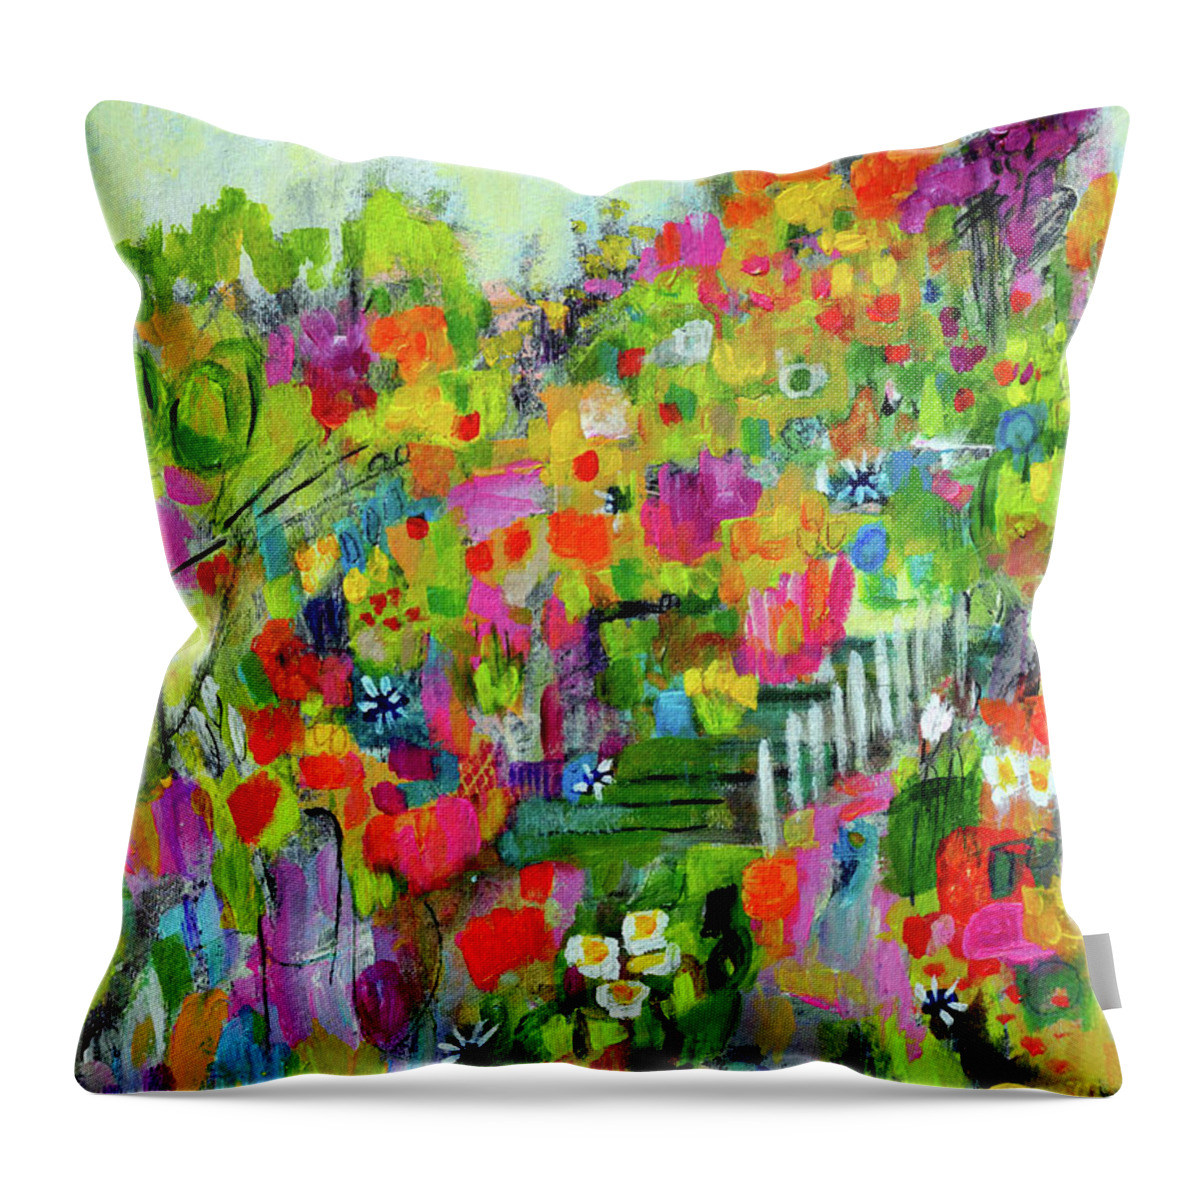 Flower Fields Throw Pillow featuring the mixed media Cheerful by Haleh Mahbod